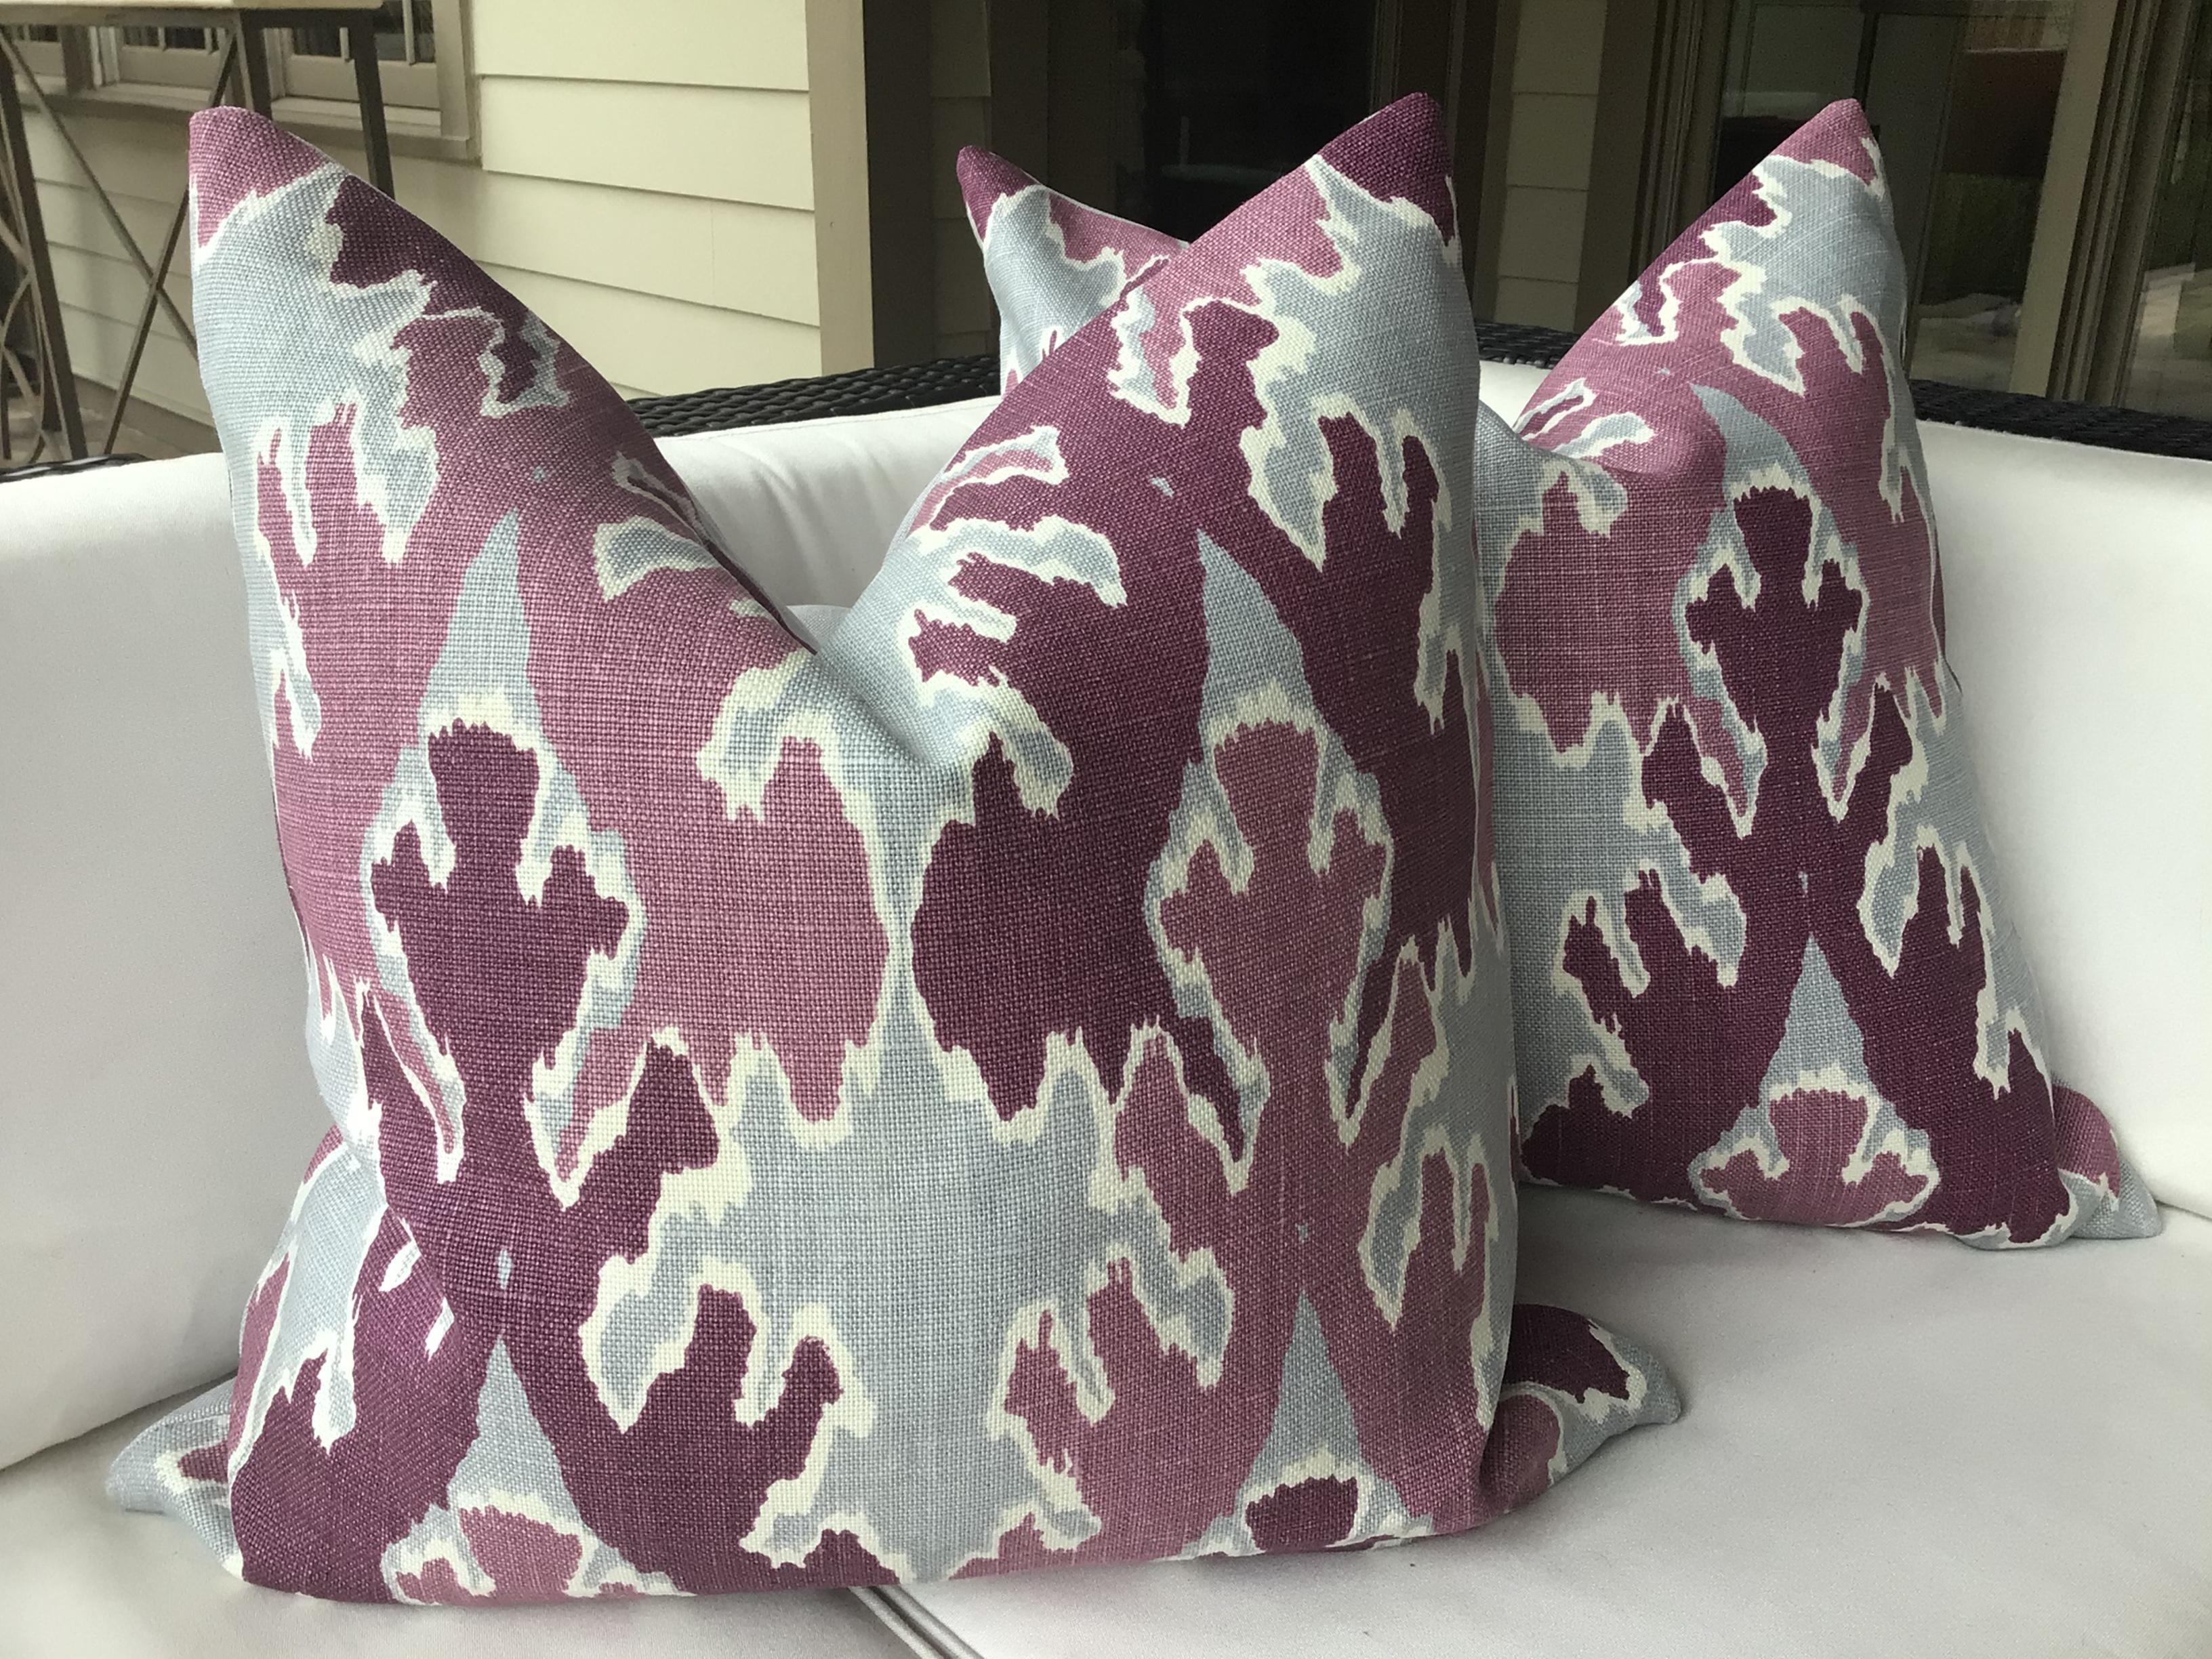 Lee Jofa Bengal Bazaar Magenta and Gray Down Filled Pillows - a Pair In New Condition For Sale In Winder, GA